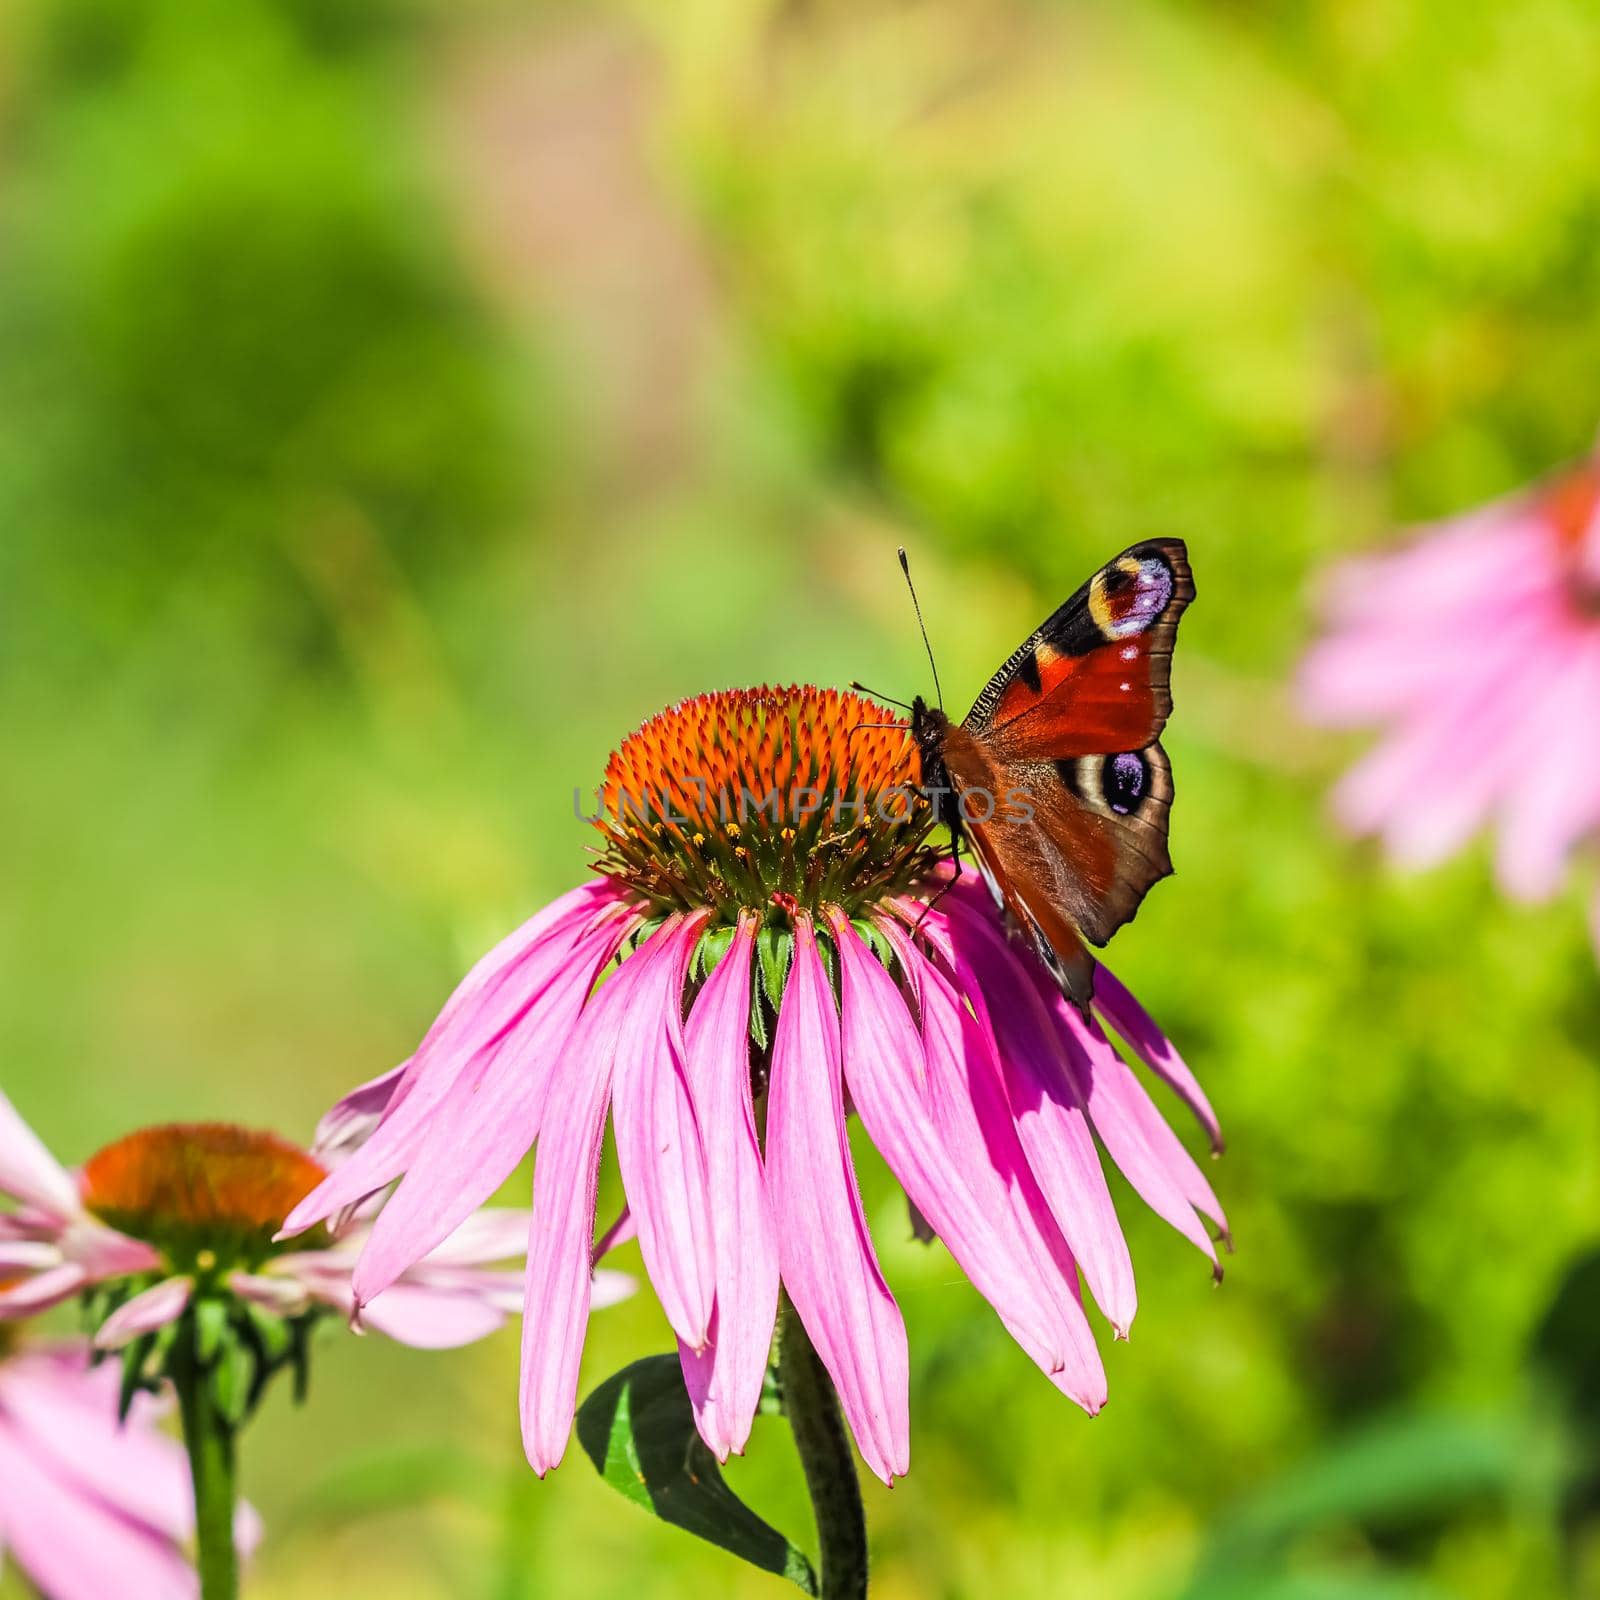 Beautiful colored European Peacock butterfly, Inachis io, Aglais io, on purple flower Echinacea in a sunny summer garden.